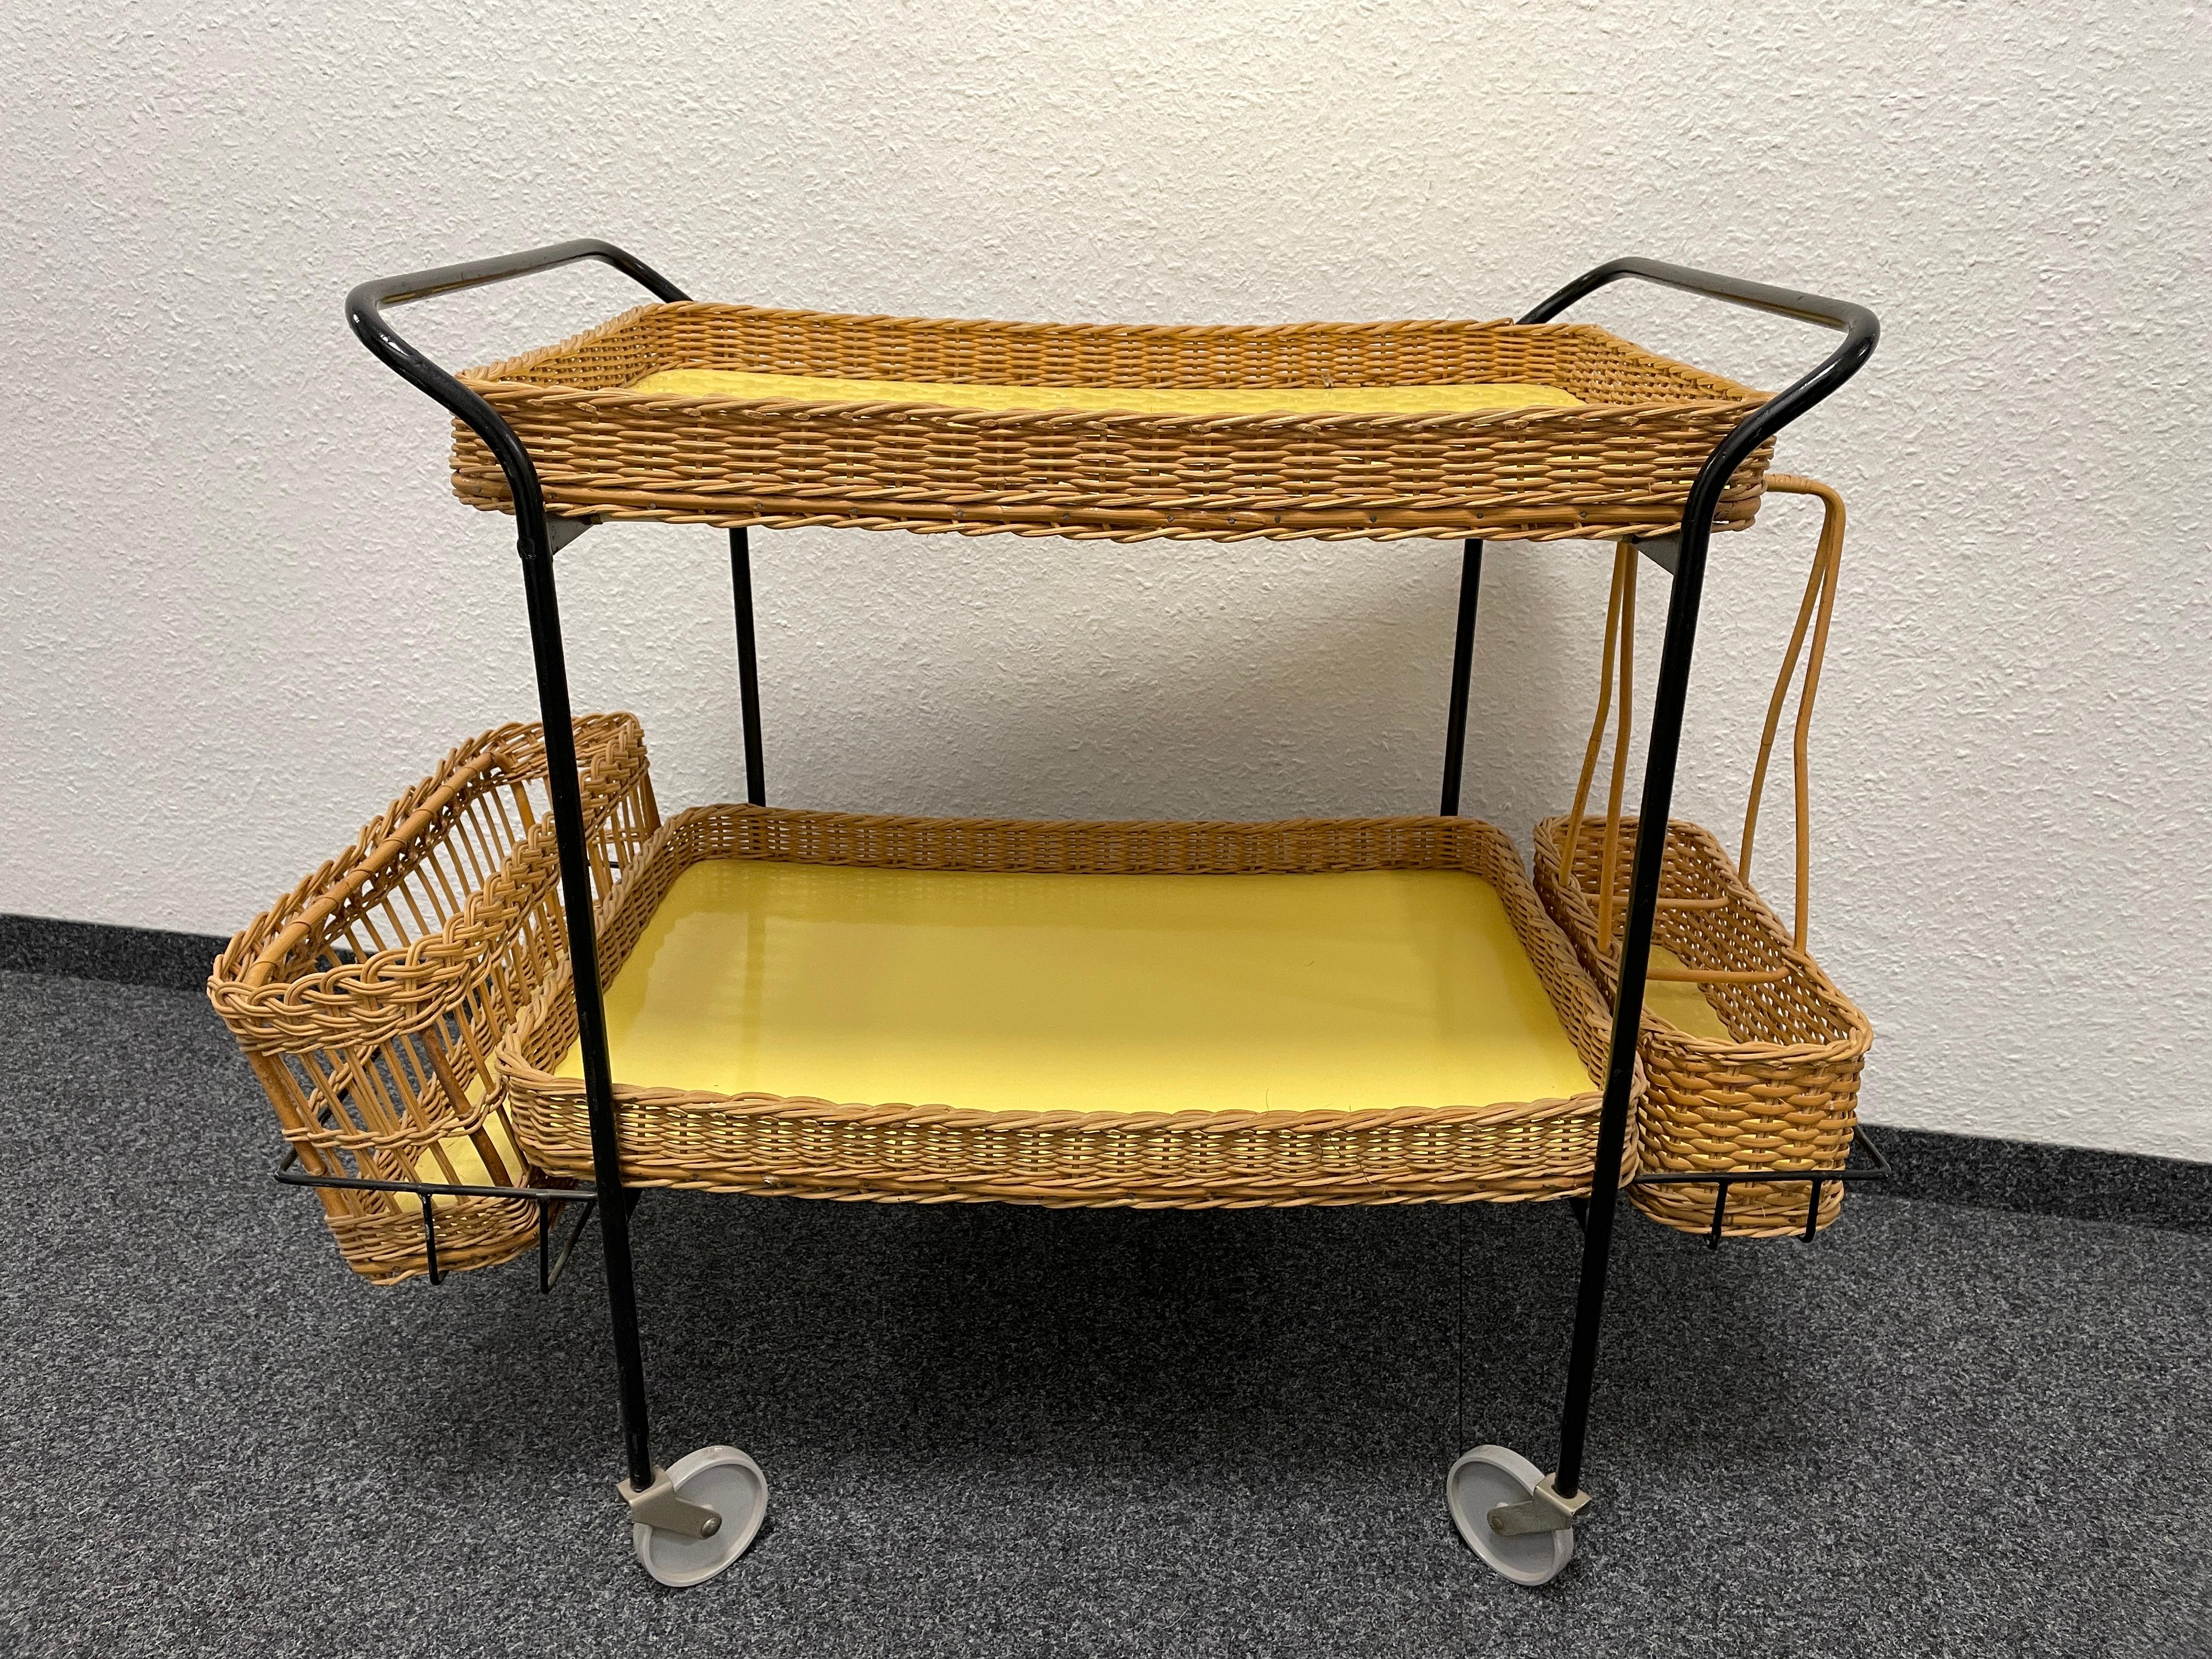 Striking mid-20th century bar trolley in metal with hand-woven wood and wicker fittings. Wood and wicker drink tray on top and on the bottom. Also included a bottle basket carrier and a bottle holder. Nice addition to your home, patio or garden.